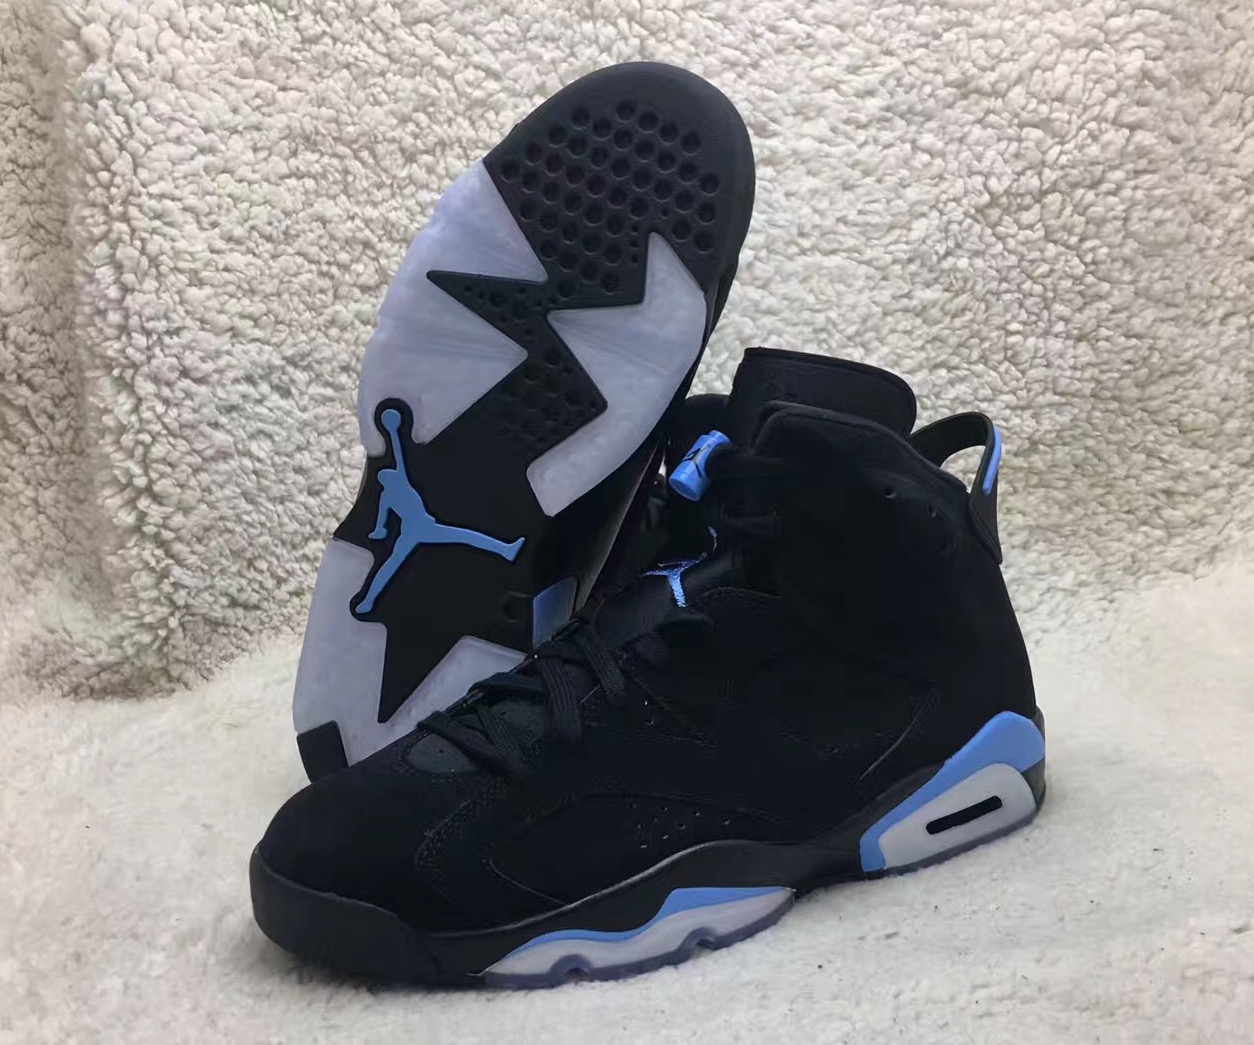 black and baby blue 6s